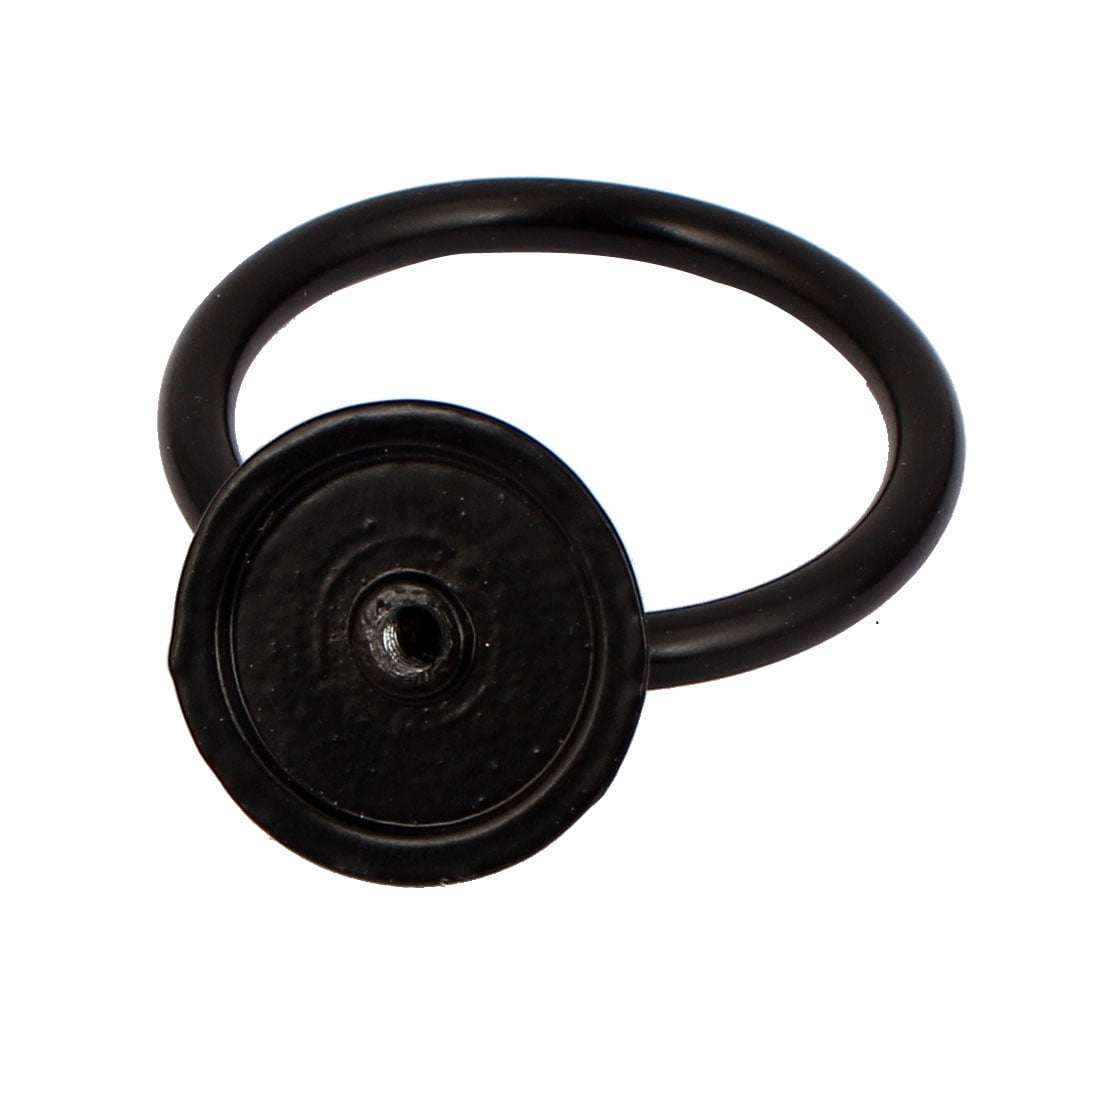 uxcell Cupboard Cabinet Drawer Dresser Rings Pulls Knob Black a16062000ux0477